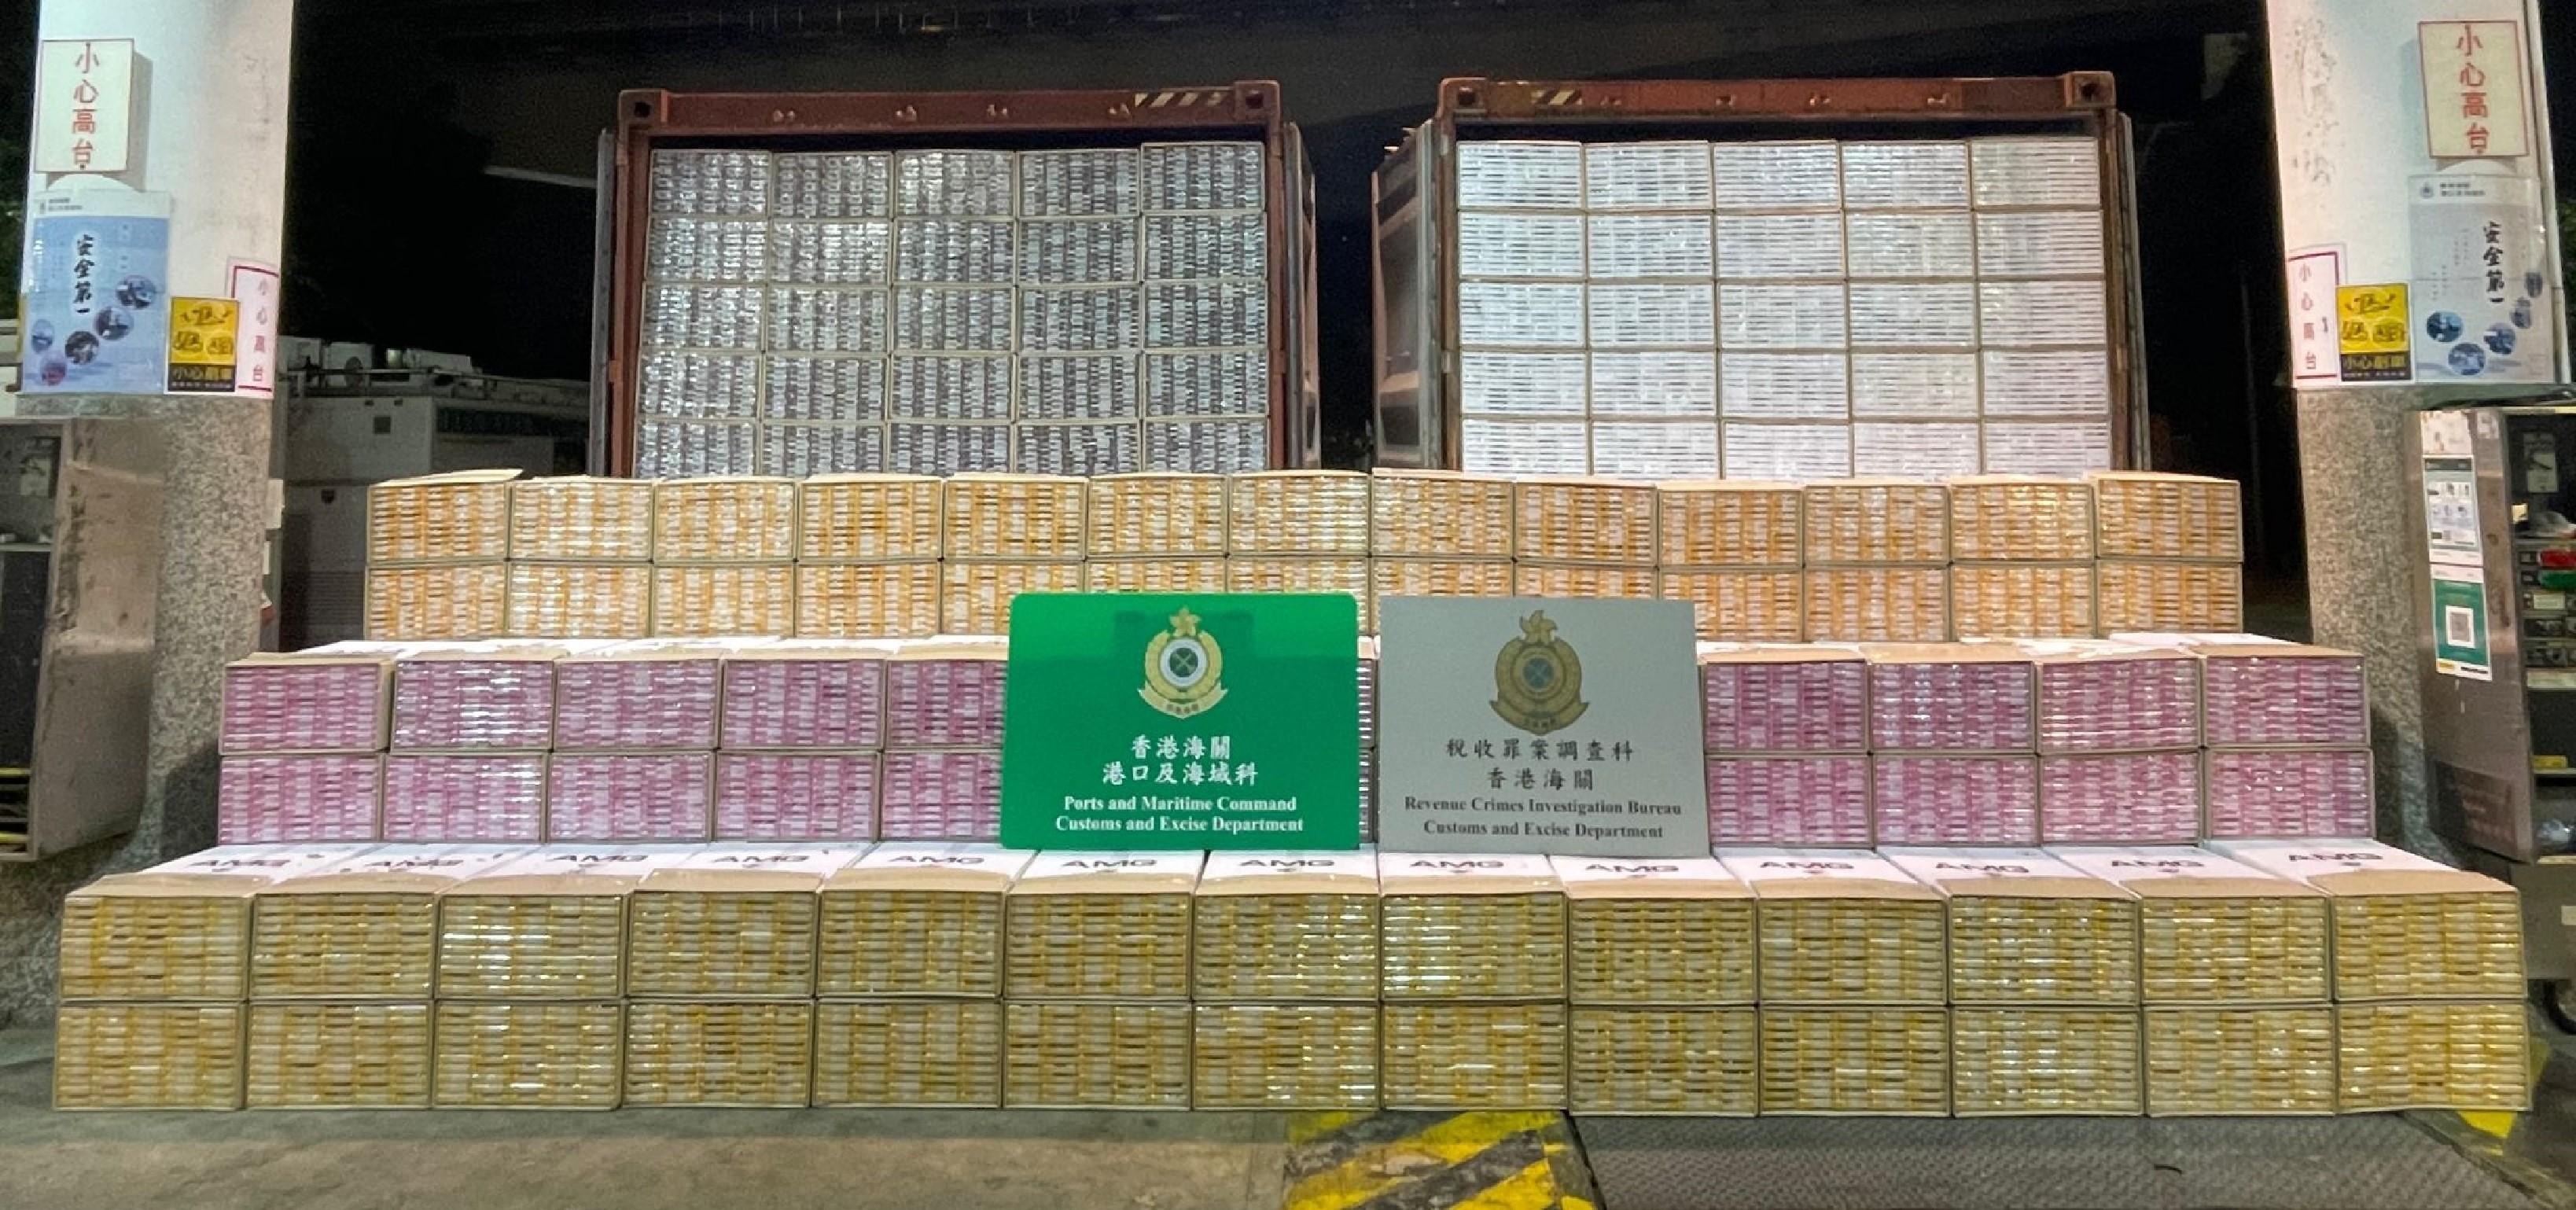 Hong Kong Customs detected two large-scale illicit cigarette smuggling cases on October 14 and 15 with a total seizure of about 43 million suspected illicit cigarettes made in Yau Ma Tei, San Tin and Tsing Yi. The estimated market value was about $120 million, with a duty potential of about $81 million. Photo shows the suspected illicit cigarettes seized by Customs officers on board a barge. The total number was about 20 million.